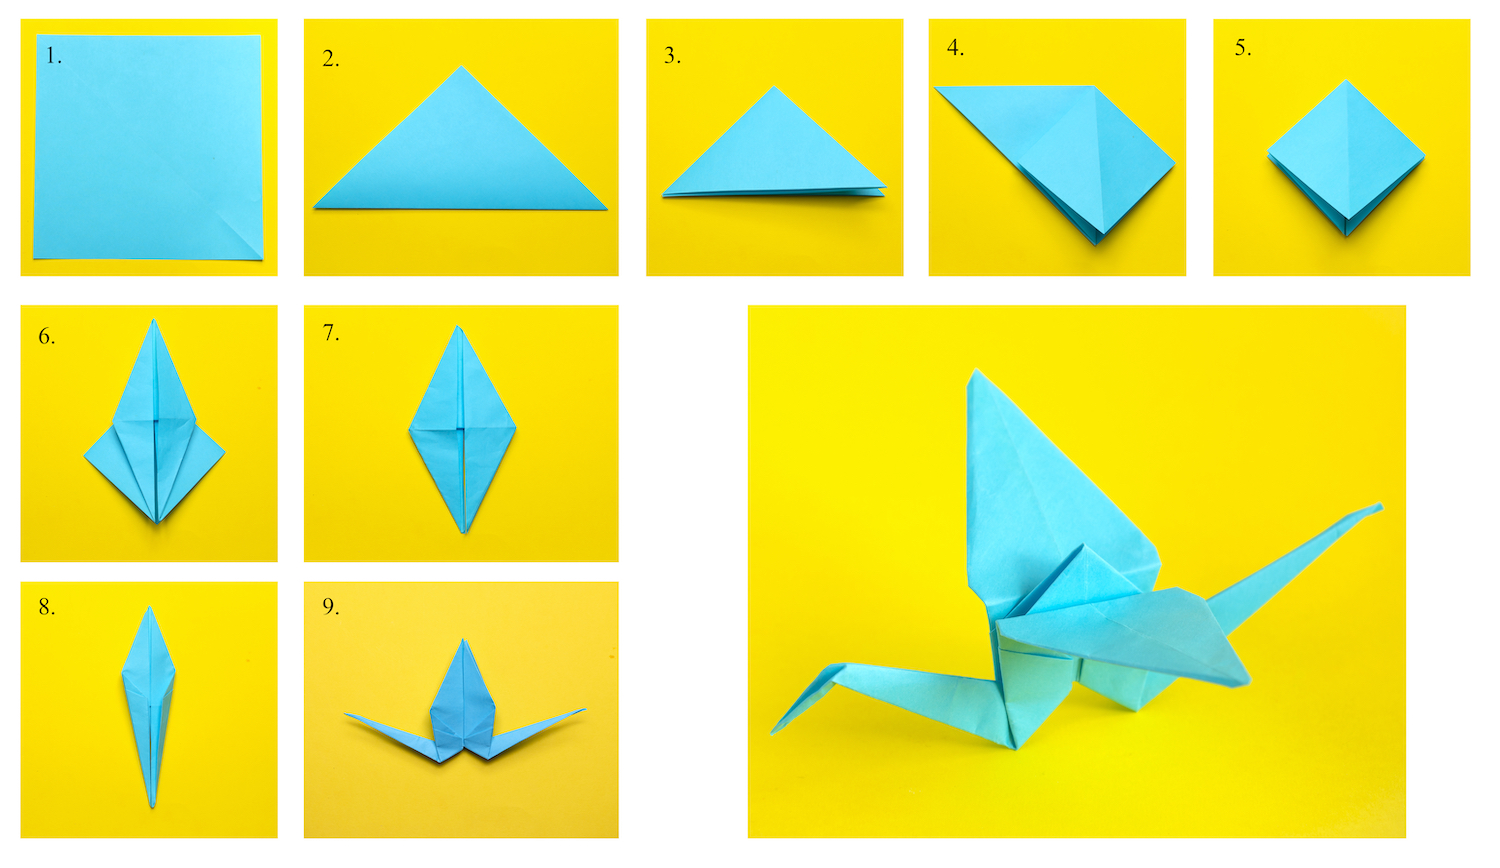 Step-by-step instructions on how to make a crane using the origami technique. DIY concept. Children's creativity.